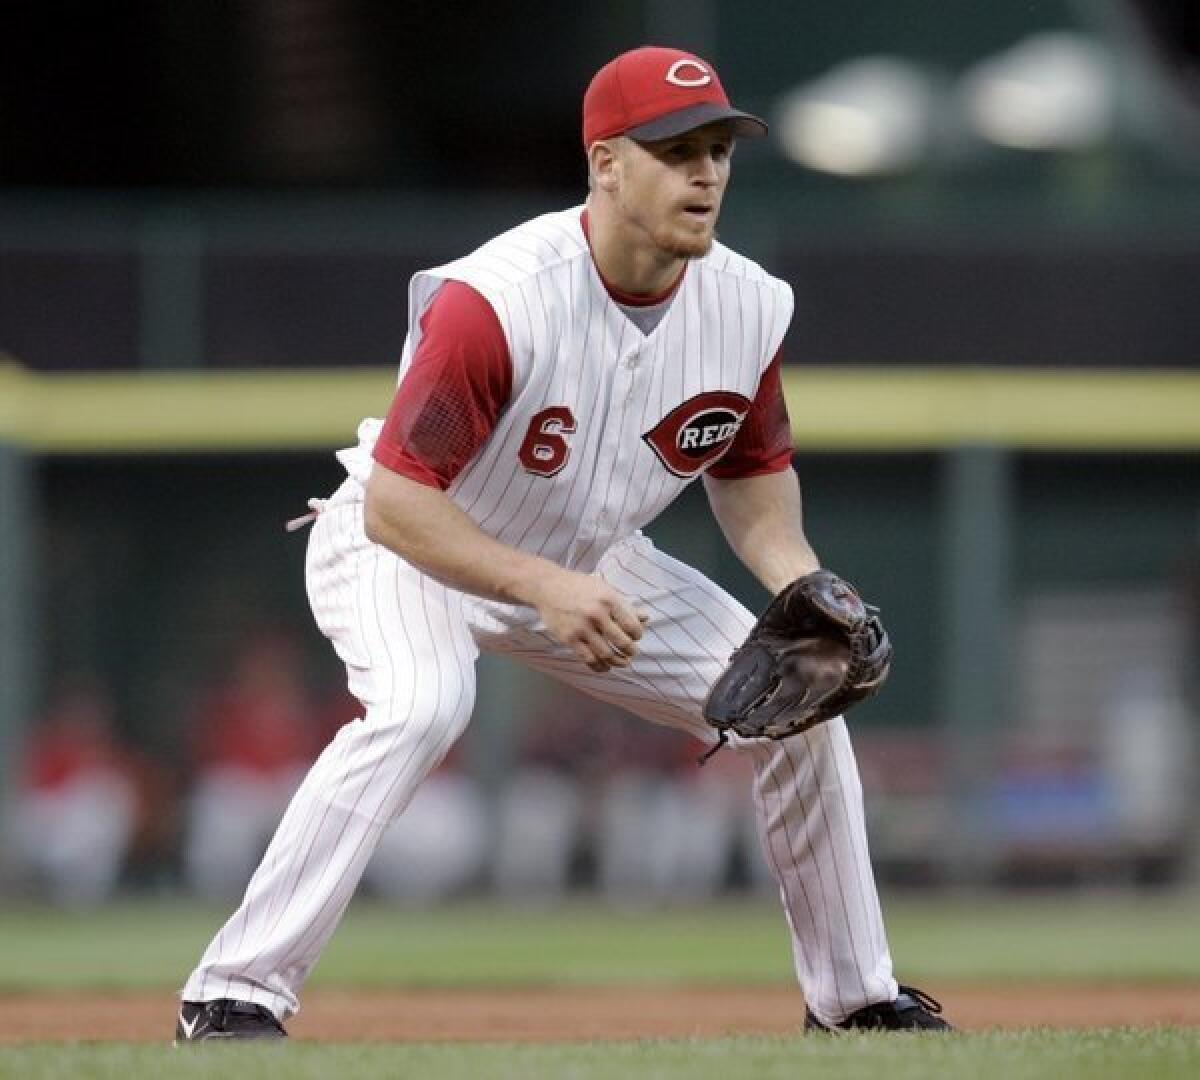 Ryan Freel with the Reds in 2006.